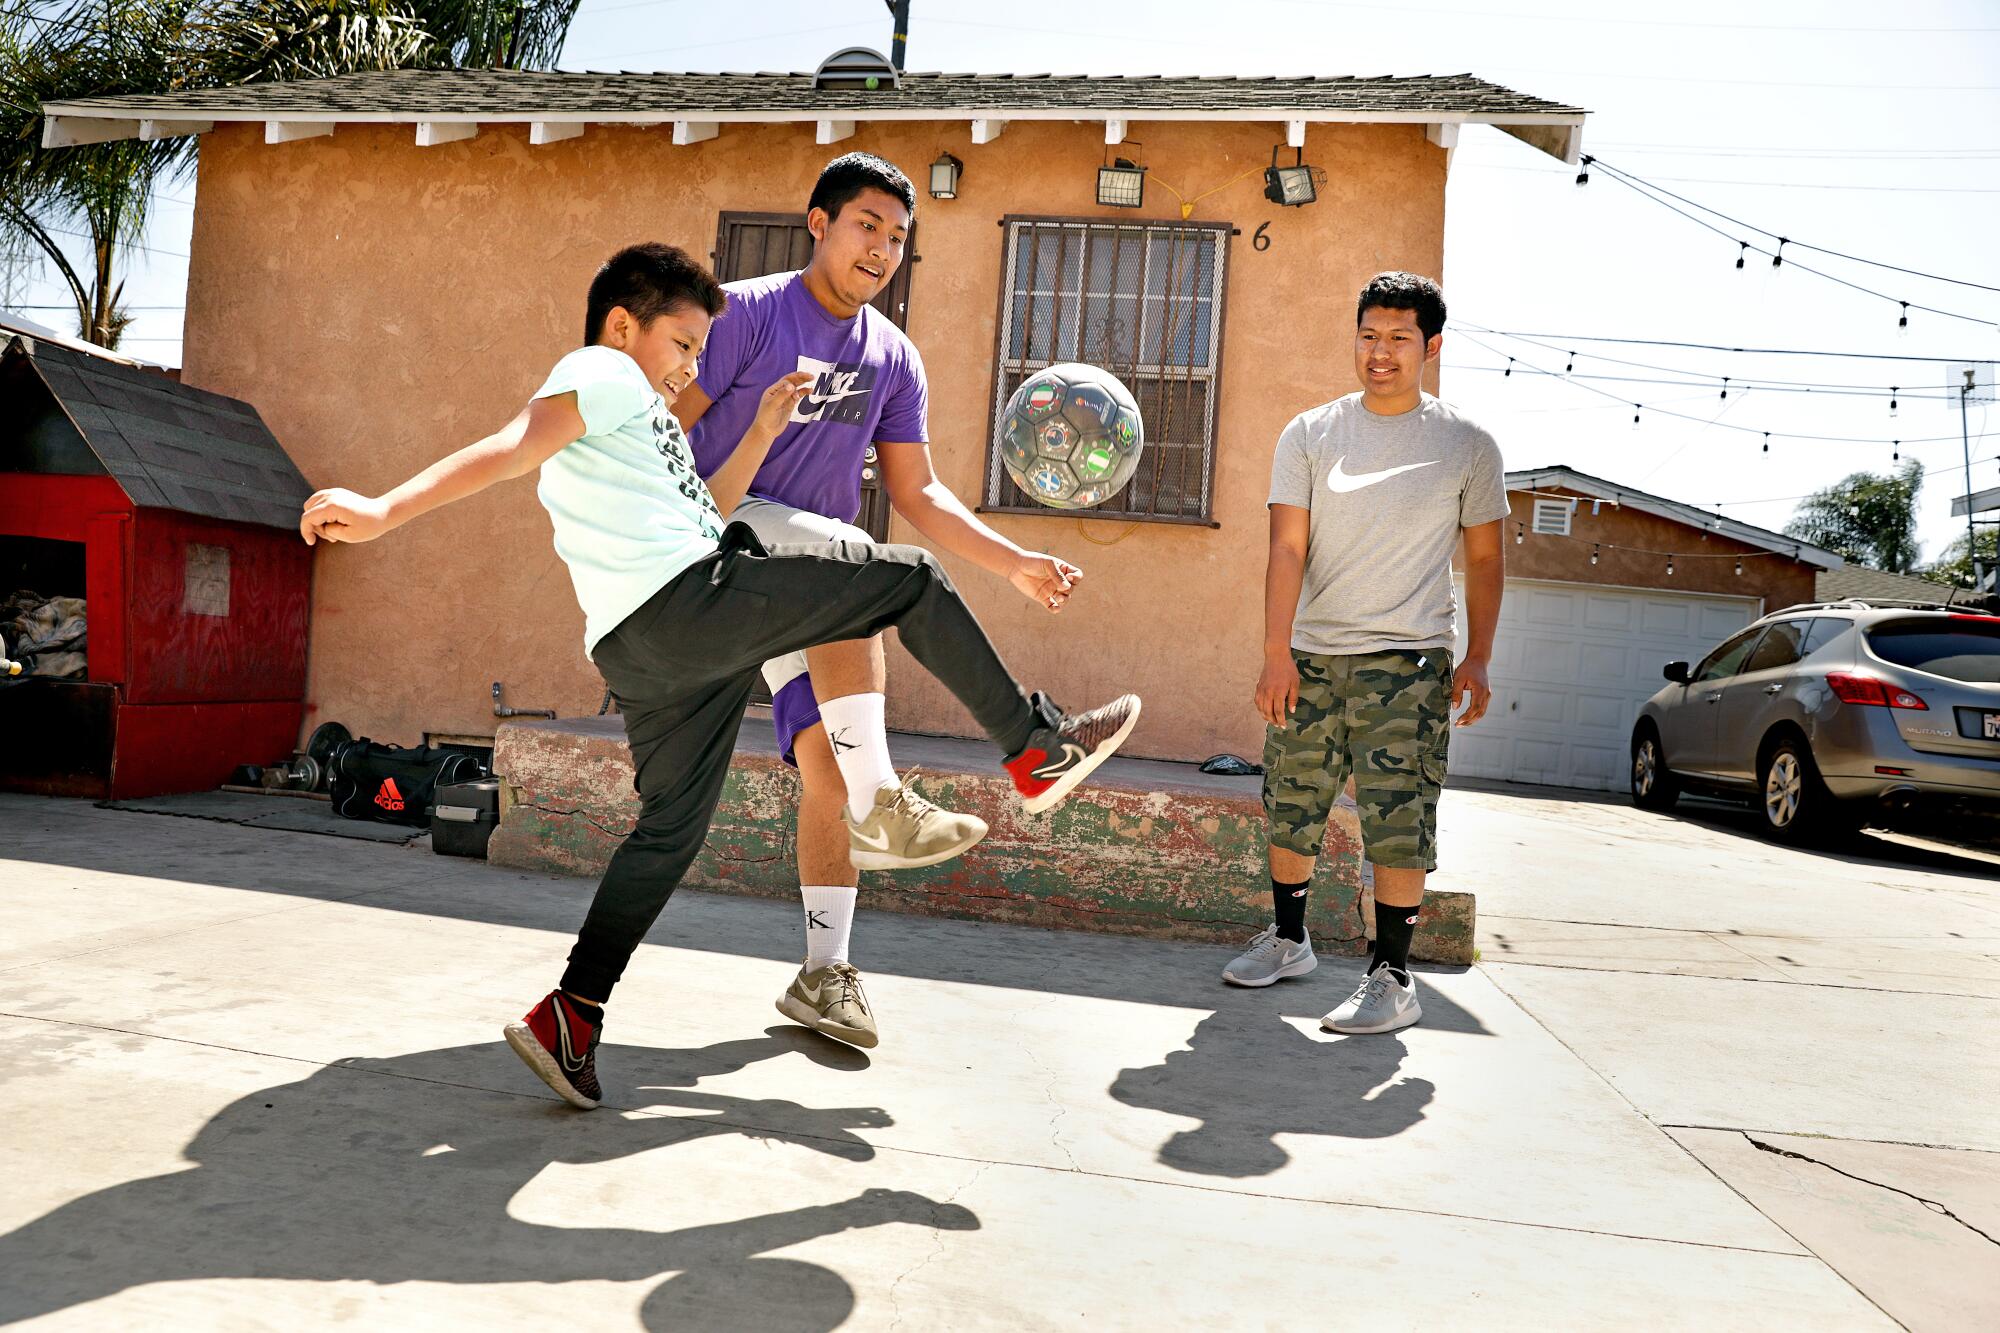 Julio Flores, right, plays soccer with his brothers Angel and David after school at home